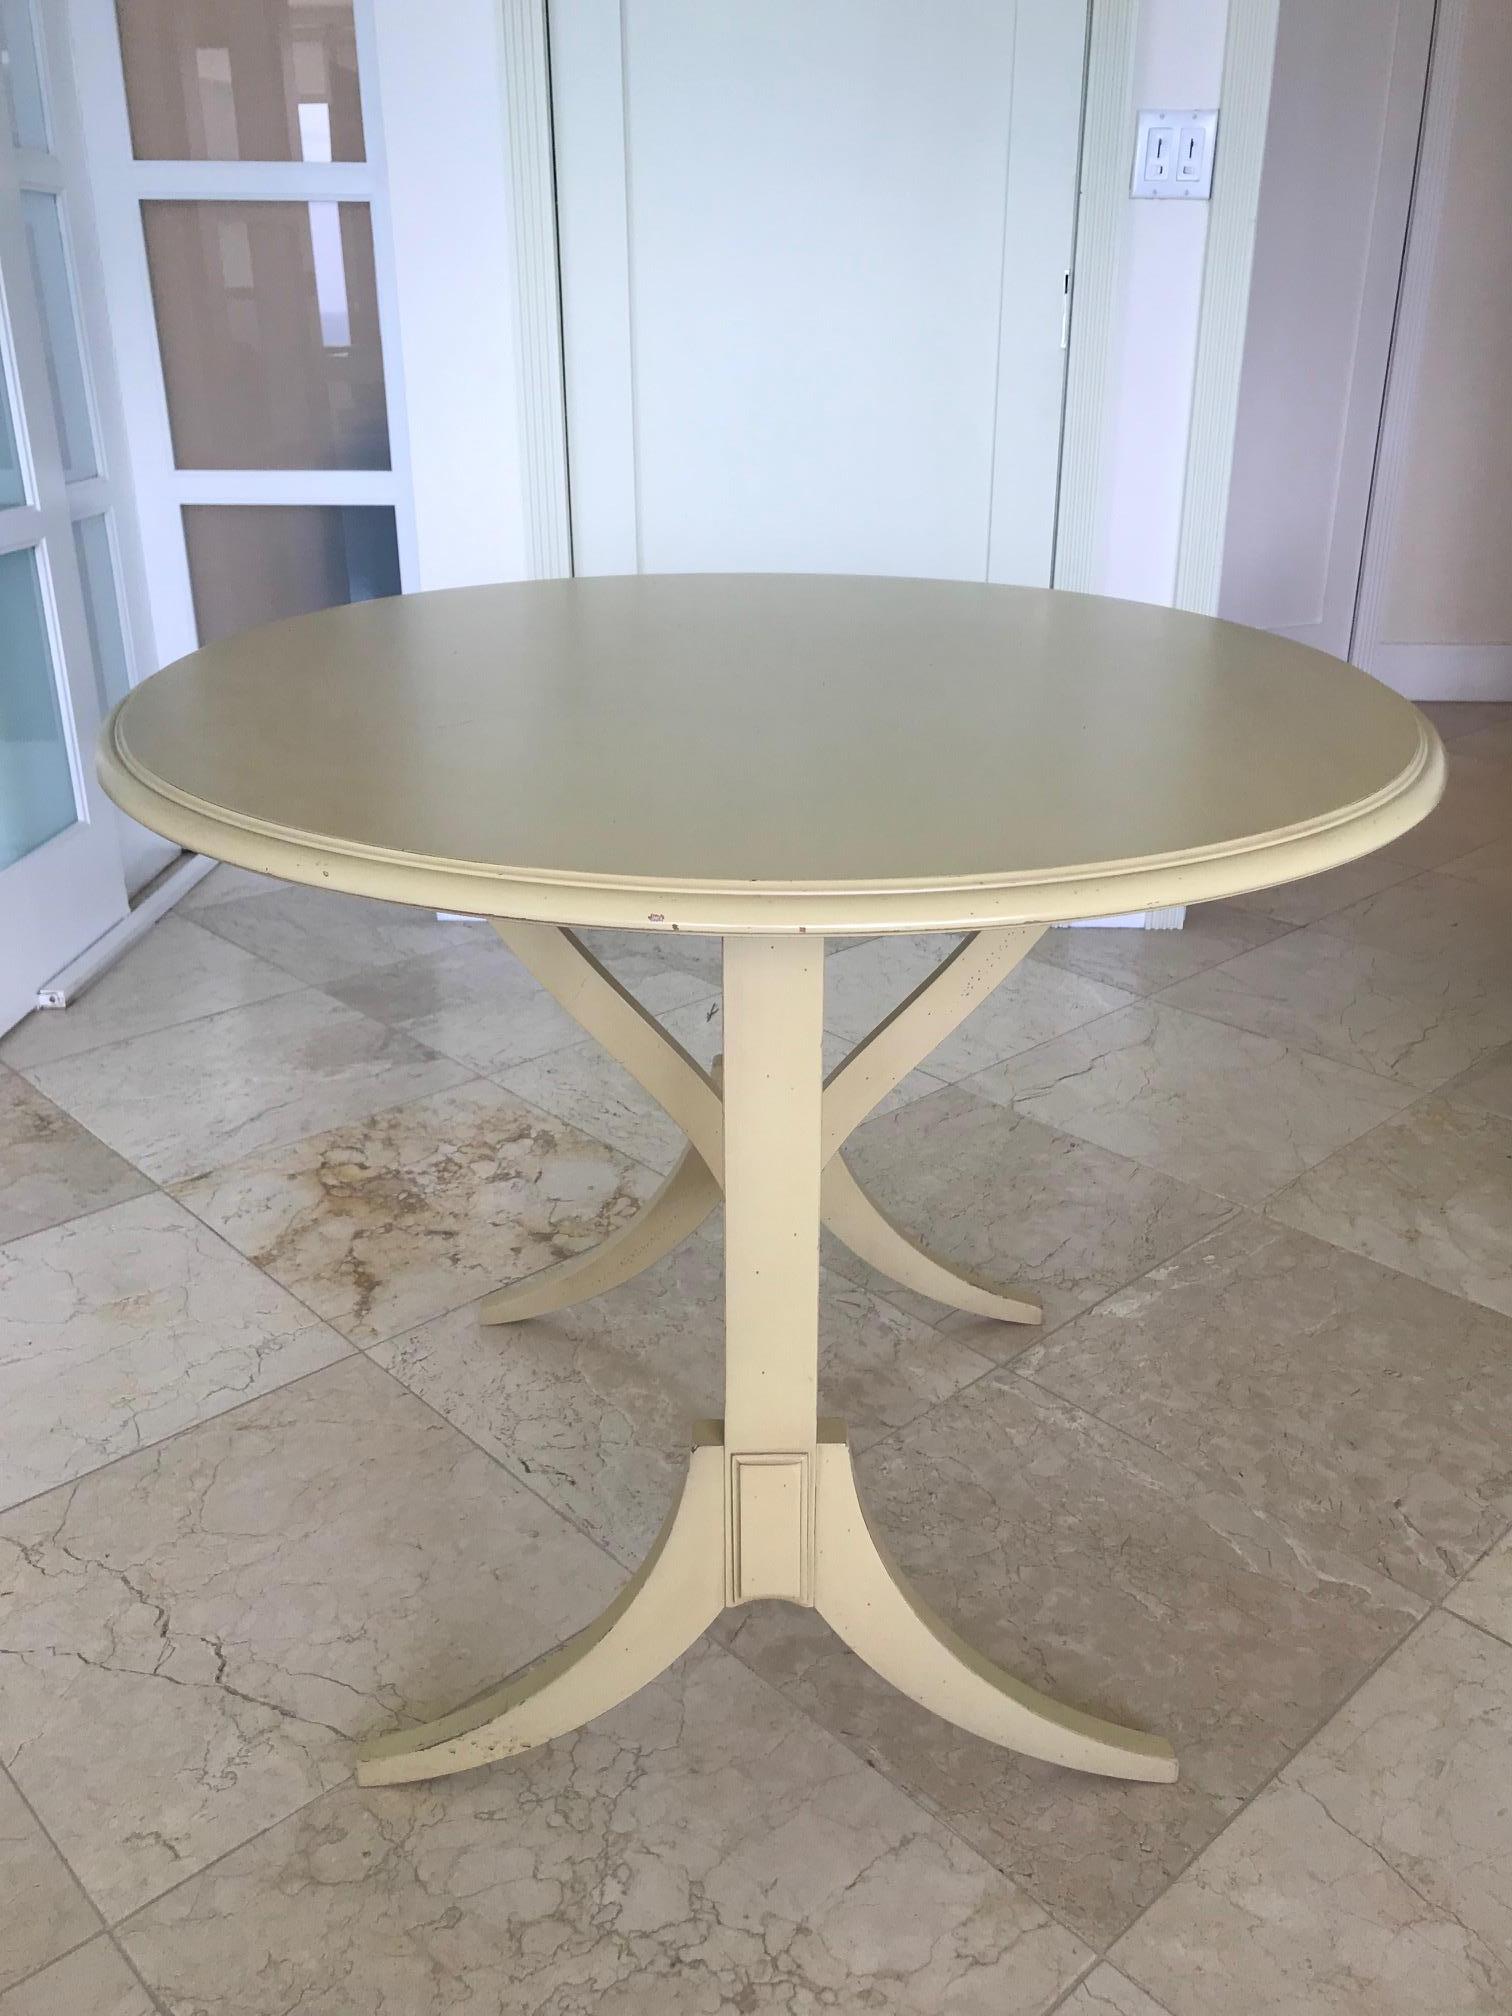 Gustavian style dessert table or library table in hand painted oakwood. Elegant hand carved designs throughout, the table features a large circular top with tilt function, for when it's not in use. The table has gorgeous splayed legs and is fitted